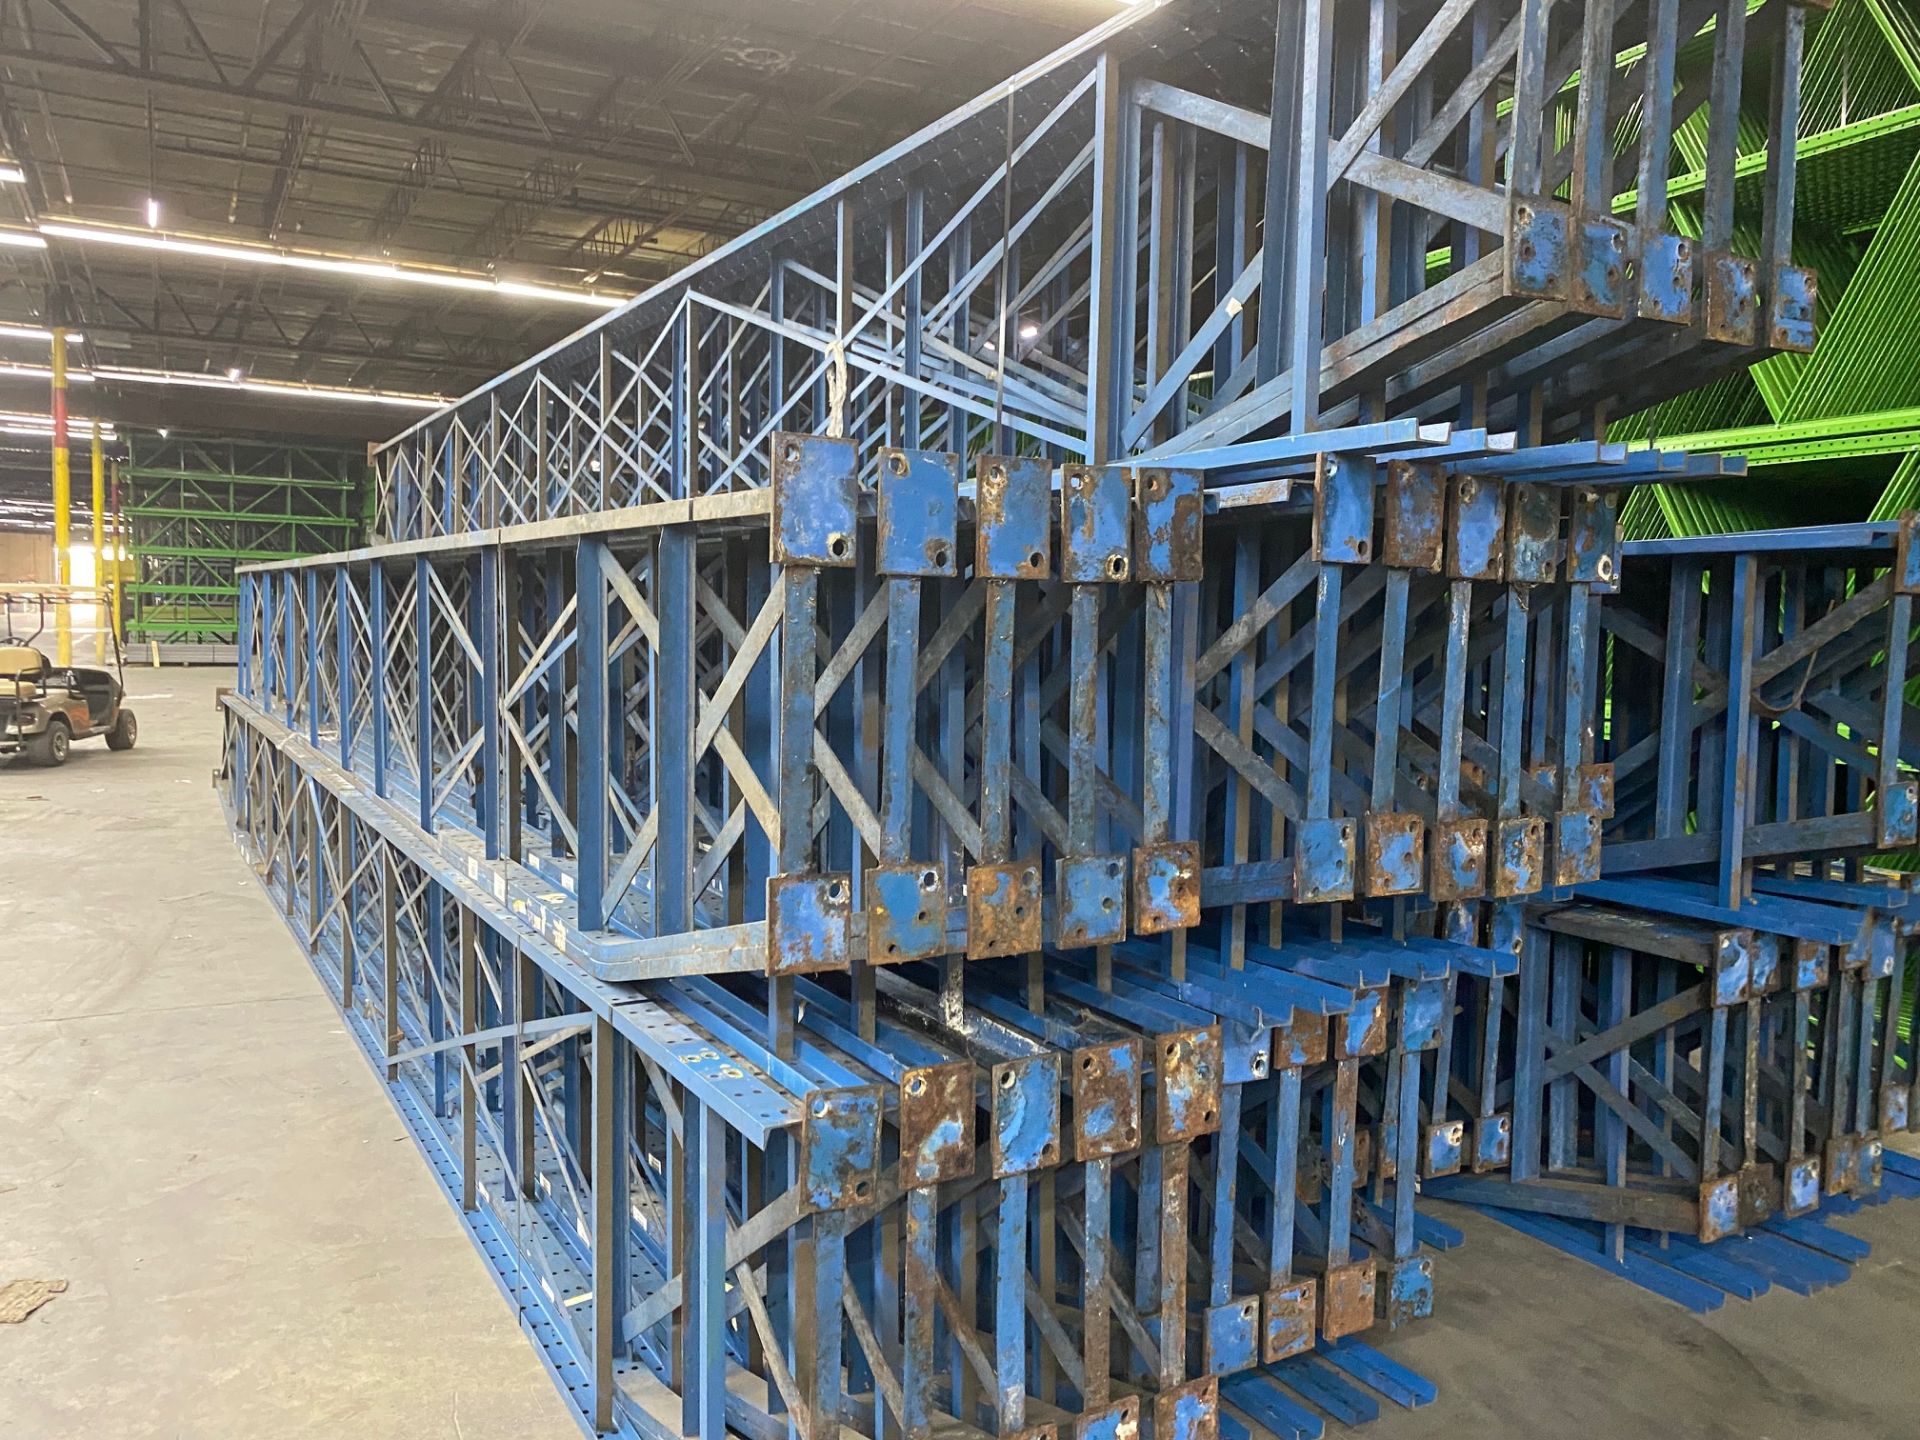 18 BAYS OF STRUCTURAL STYLE PALLET RACKS - 9 BAYS X 2 LINES X 30'H X 36"D X 112"W - Image 2 of 5